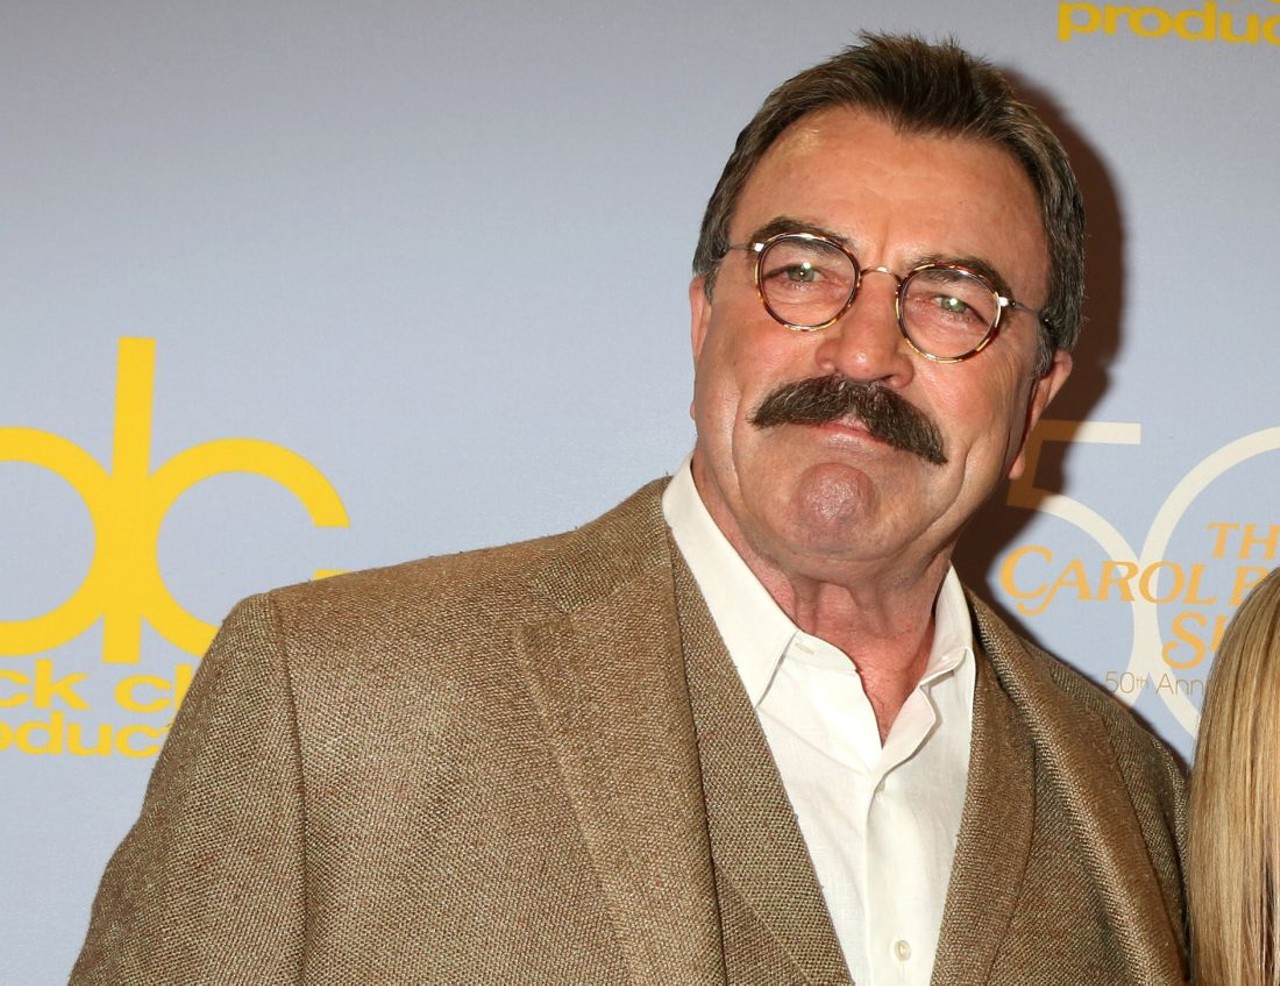 Tom Selleck
&nbsp;Tom Selleck has been gracing our screens since the mid-1960s, starring in TV&#146;s most popular series, including Magnum P.I., Three Men and a Baby, Friends, and Blue Bloods. The Emmy award-winning actor has also been seen in multiple commercials, and he played the lead role of Murray in Broadway&#146;s A Thousand Clowns. 
Kathy Hutchins / Shutterstock